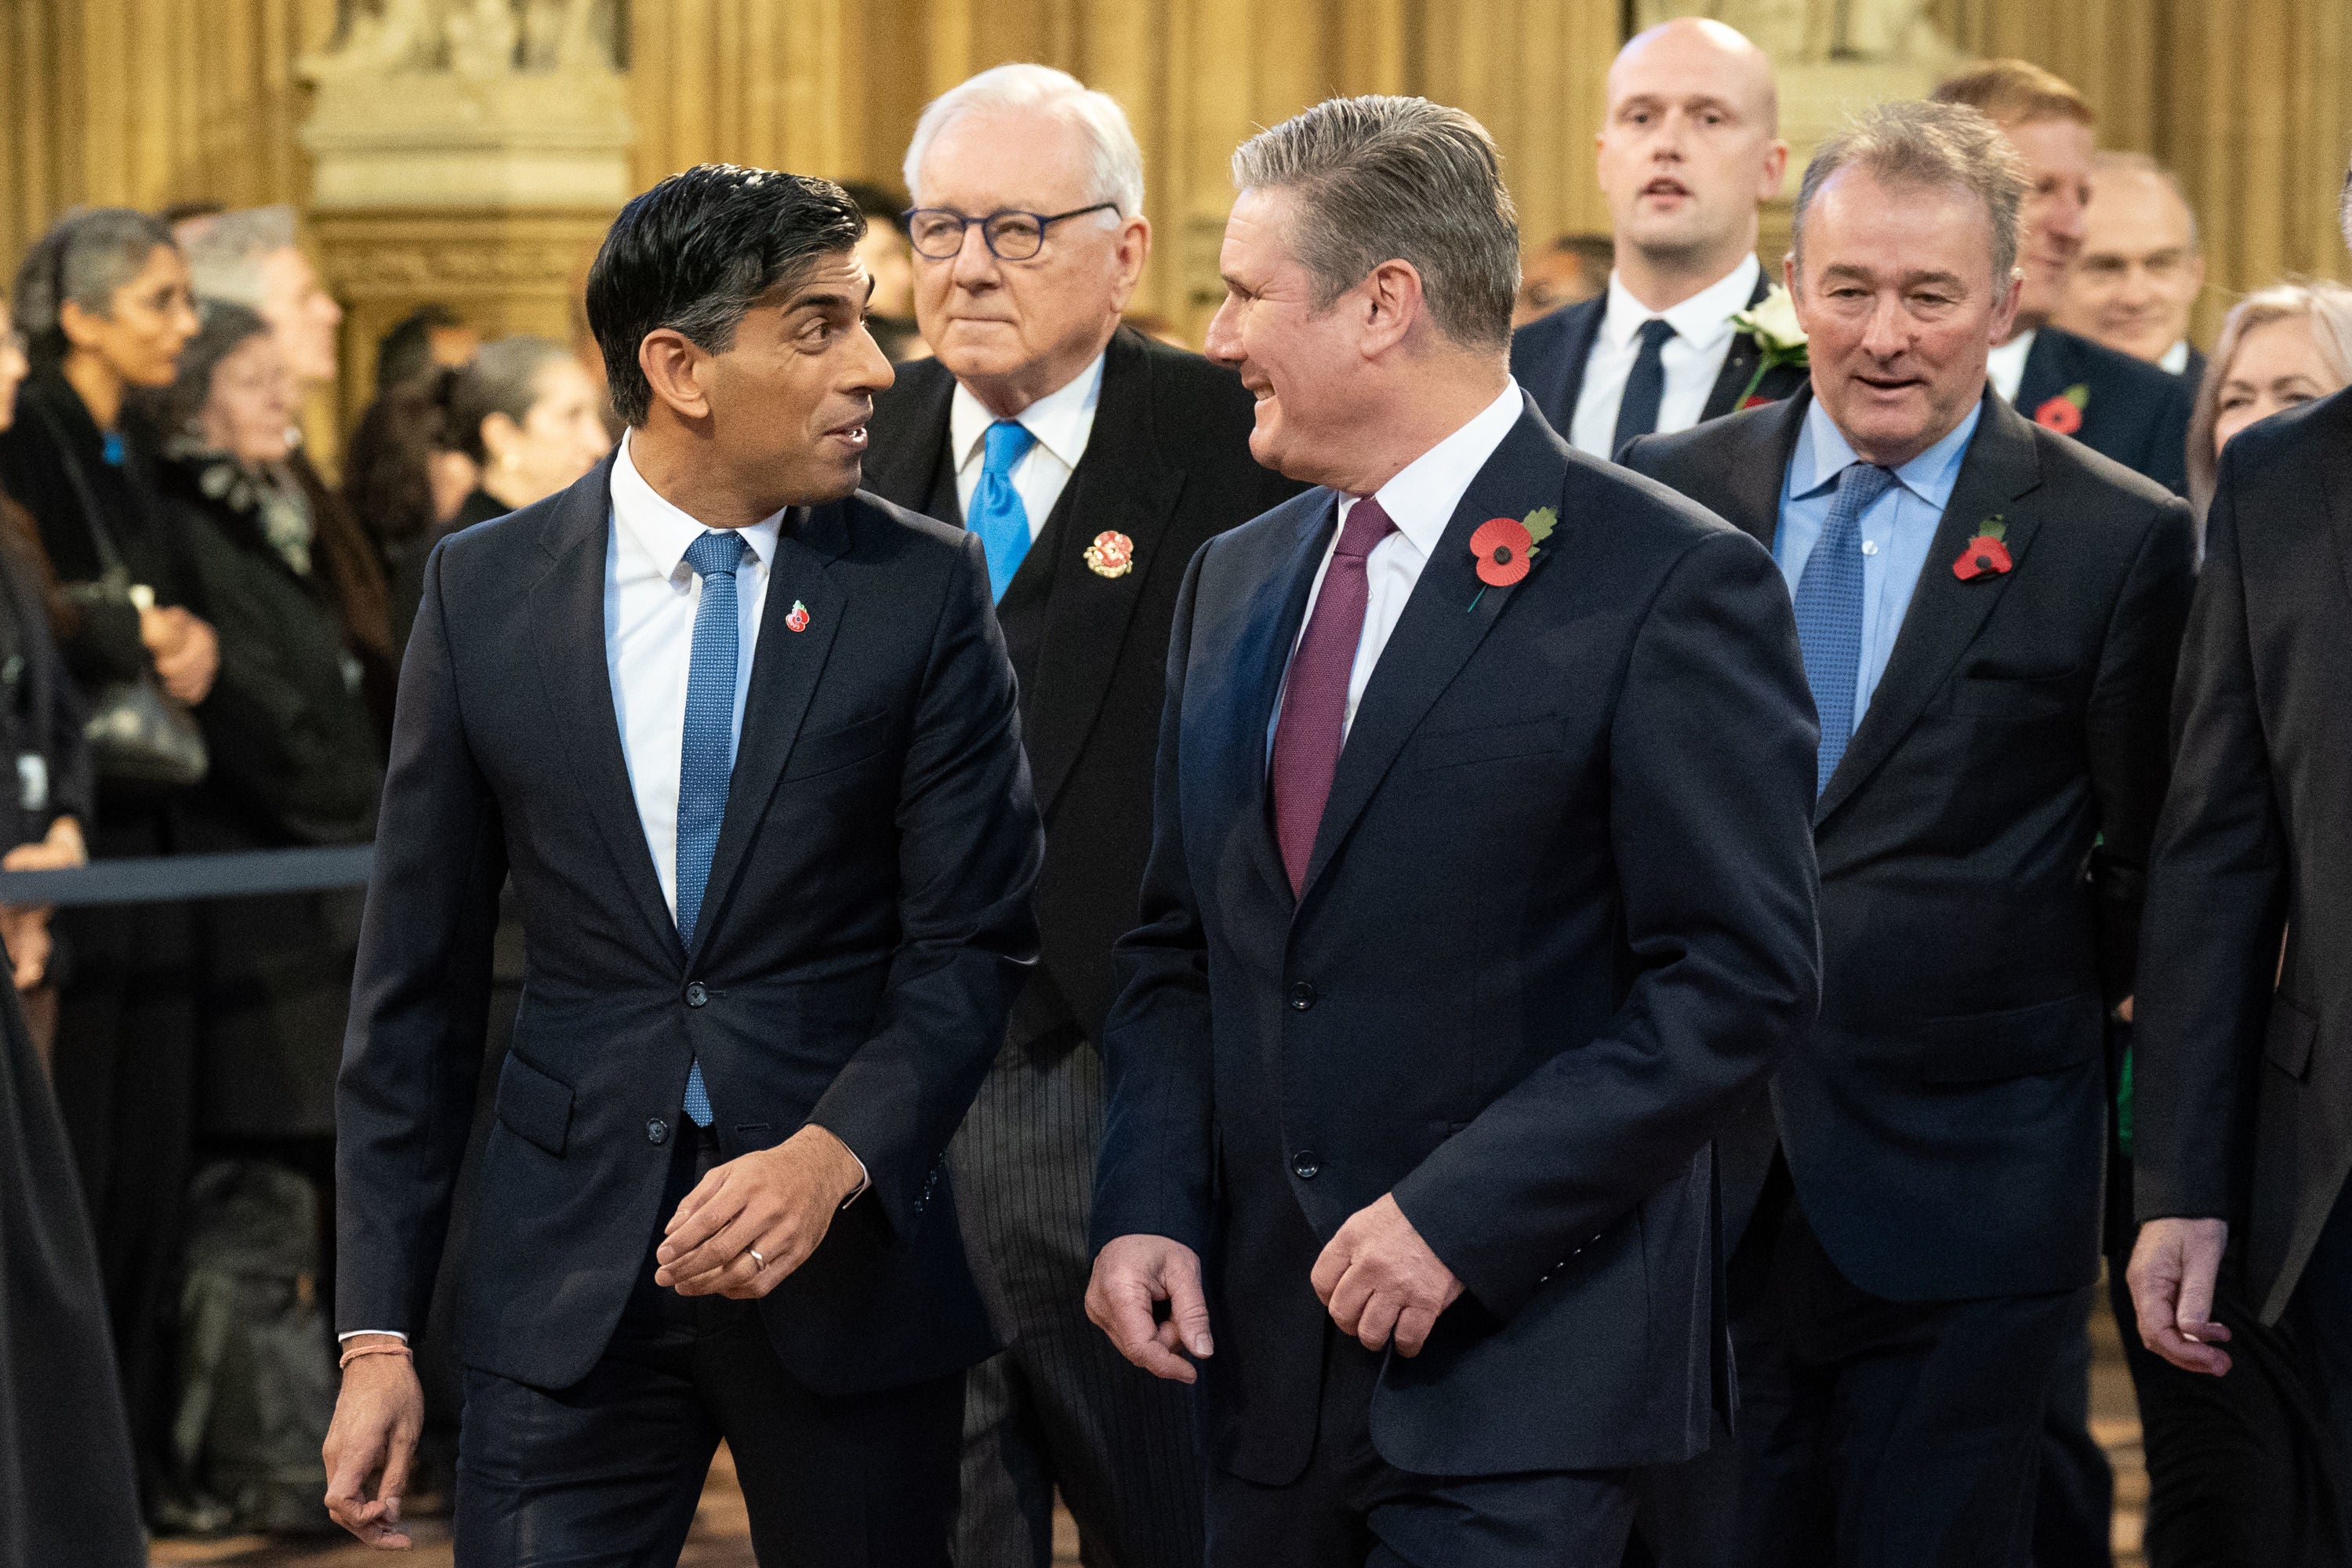 Prime Minister Rishi Sunak walks with Labour Party leader Sir Keir Starmer through the Central Lobby at Westminster